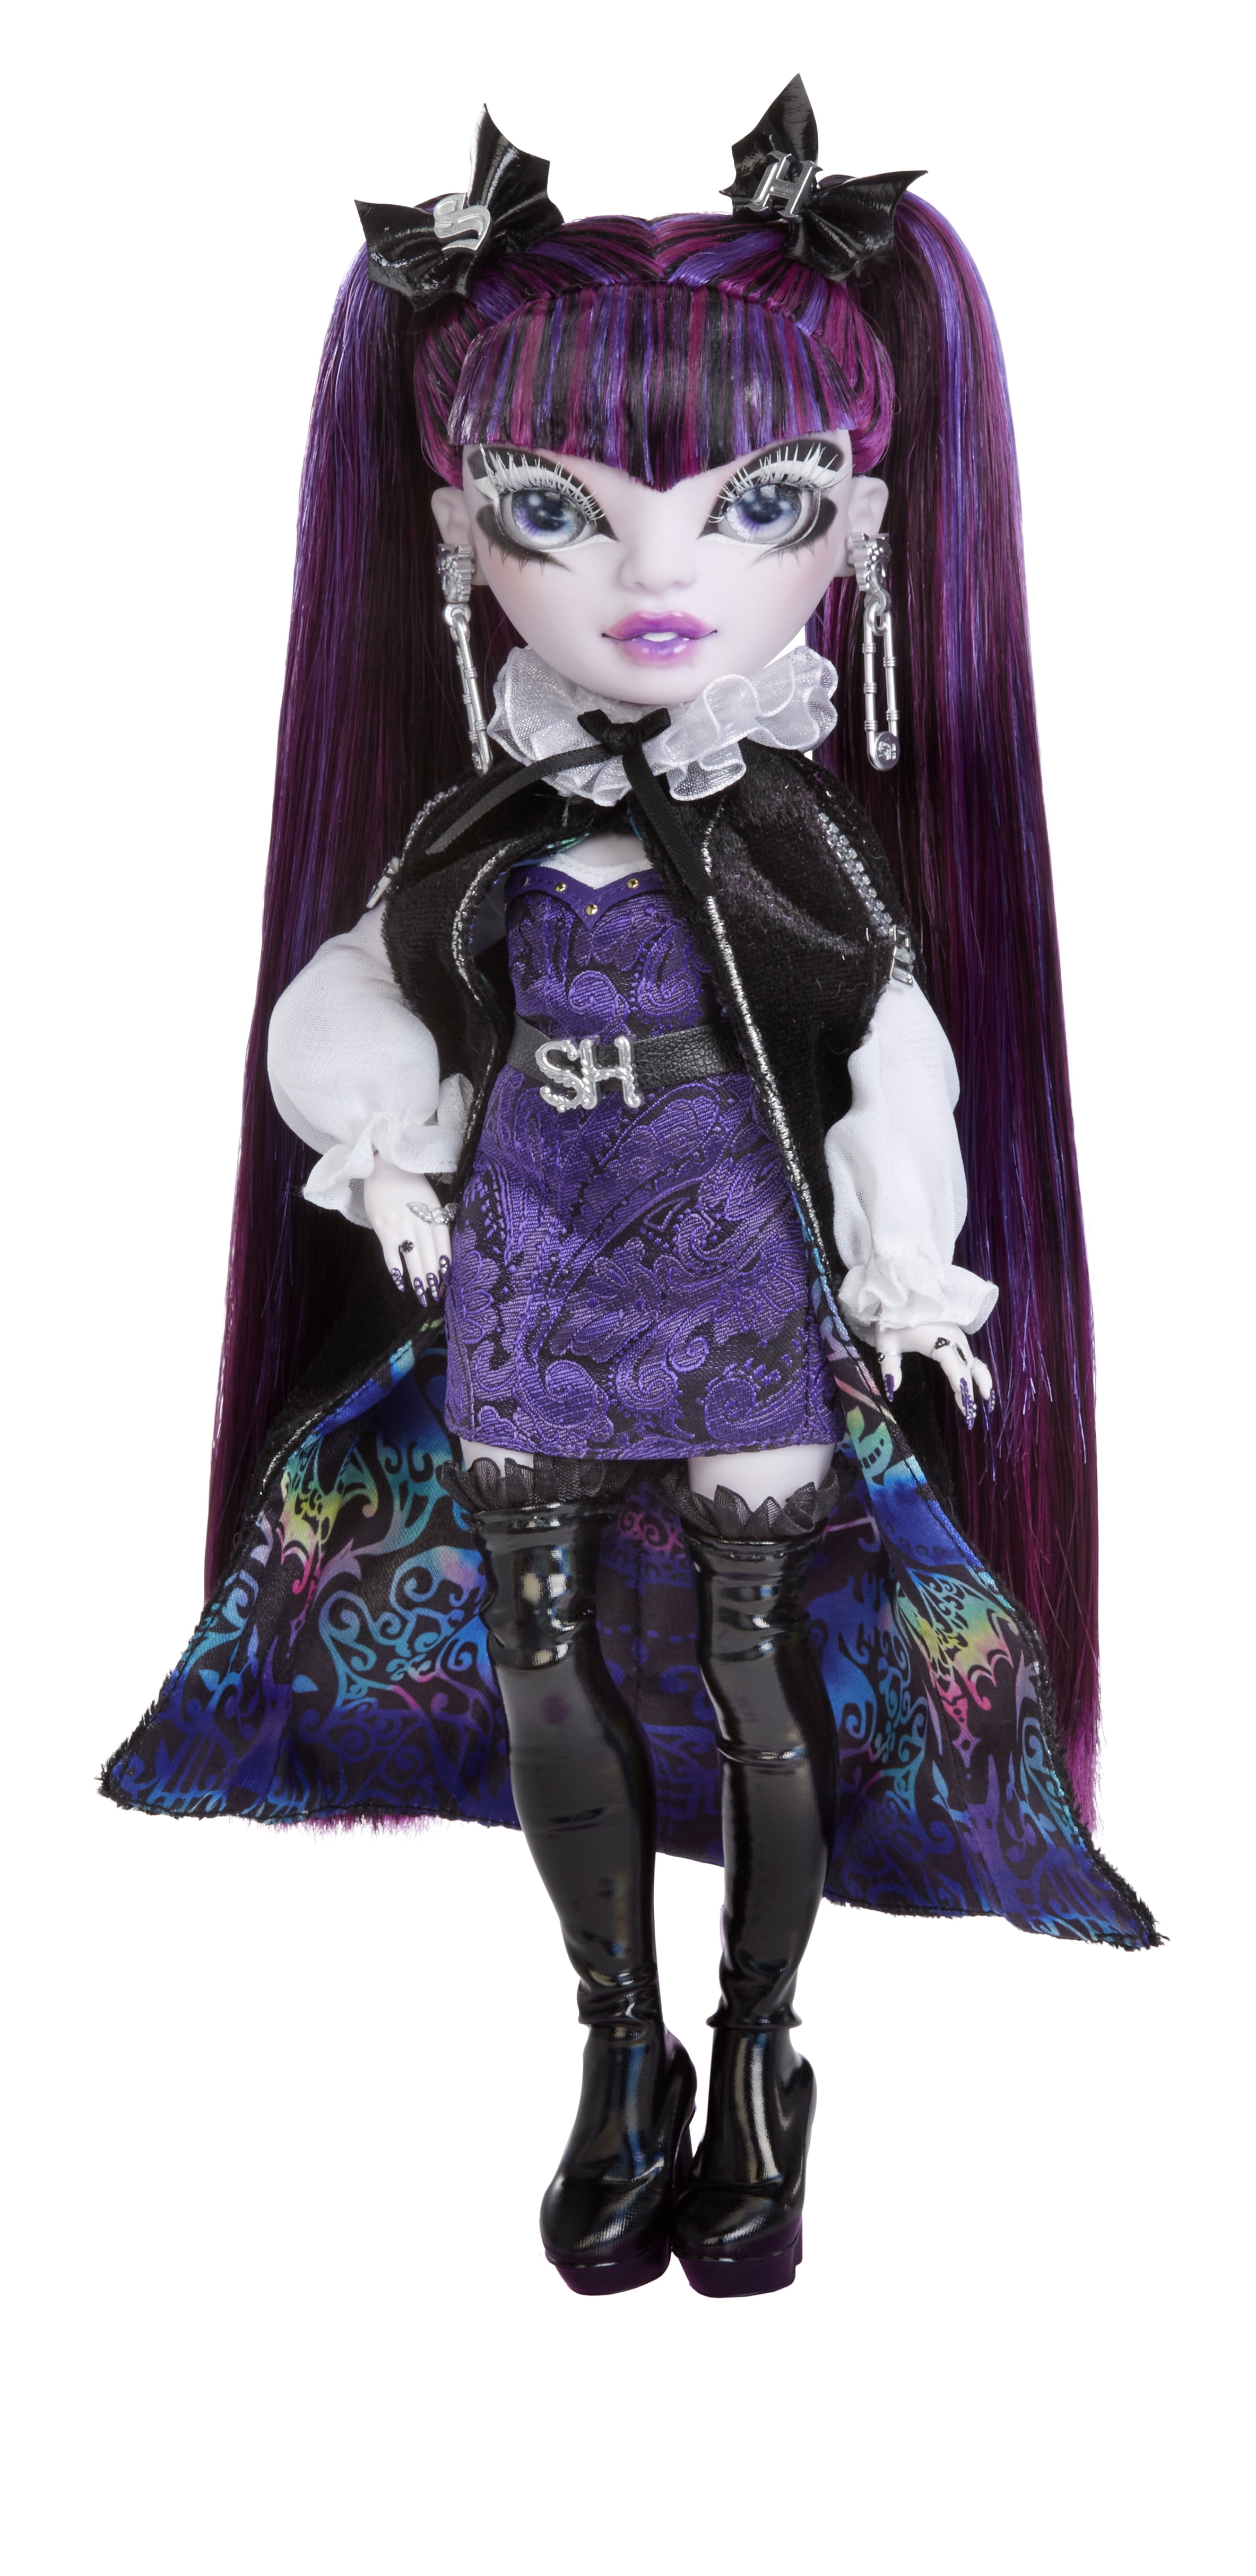 Rainbow High Rainbow Vision COSTUME BALL Shadow High ? Demi Batista (Purple) Fashion Doll. 11 inch Bat themed Costume and Accessories. Toys for Kids, Great Gift for Kids 6-12 Years Old & Collectors